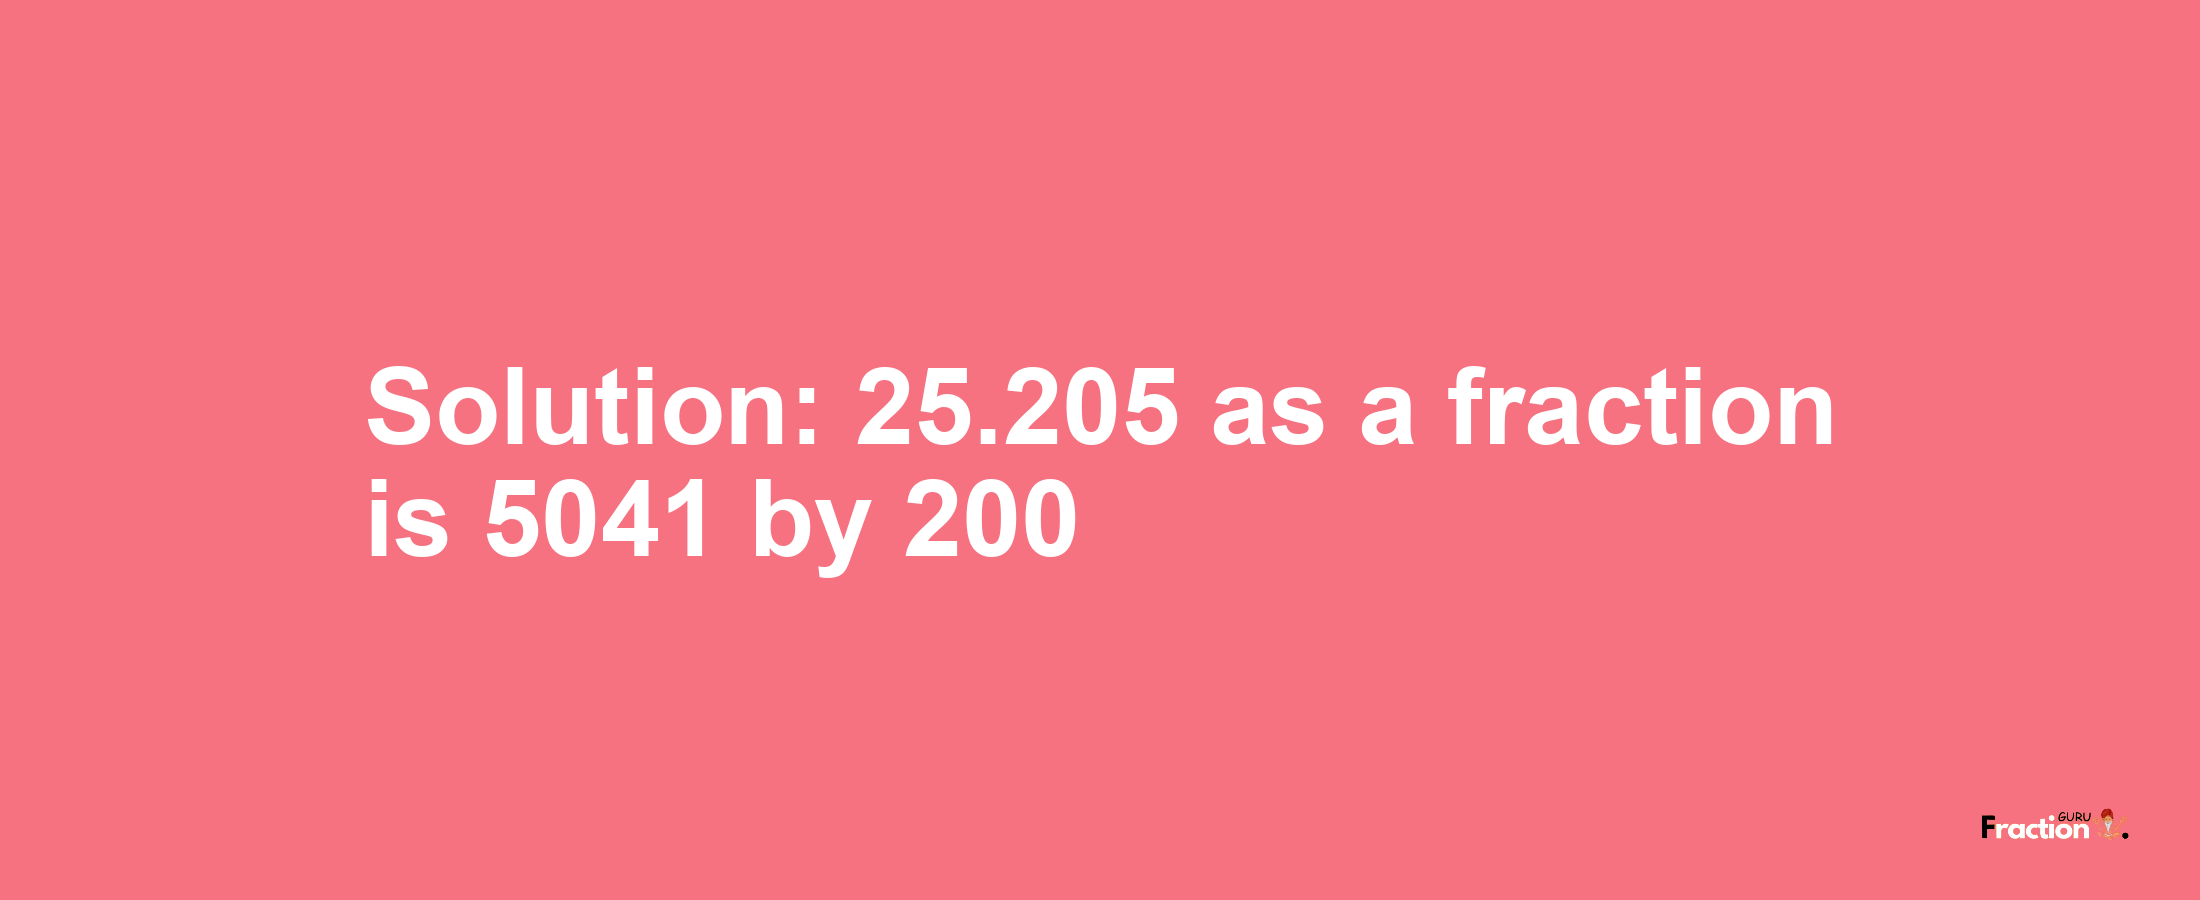 Solution:25.205 as a fraction is 5041/200